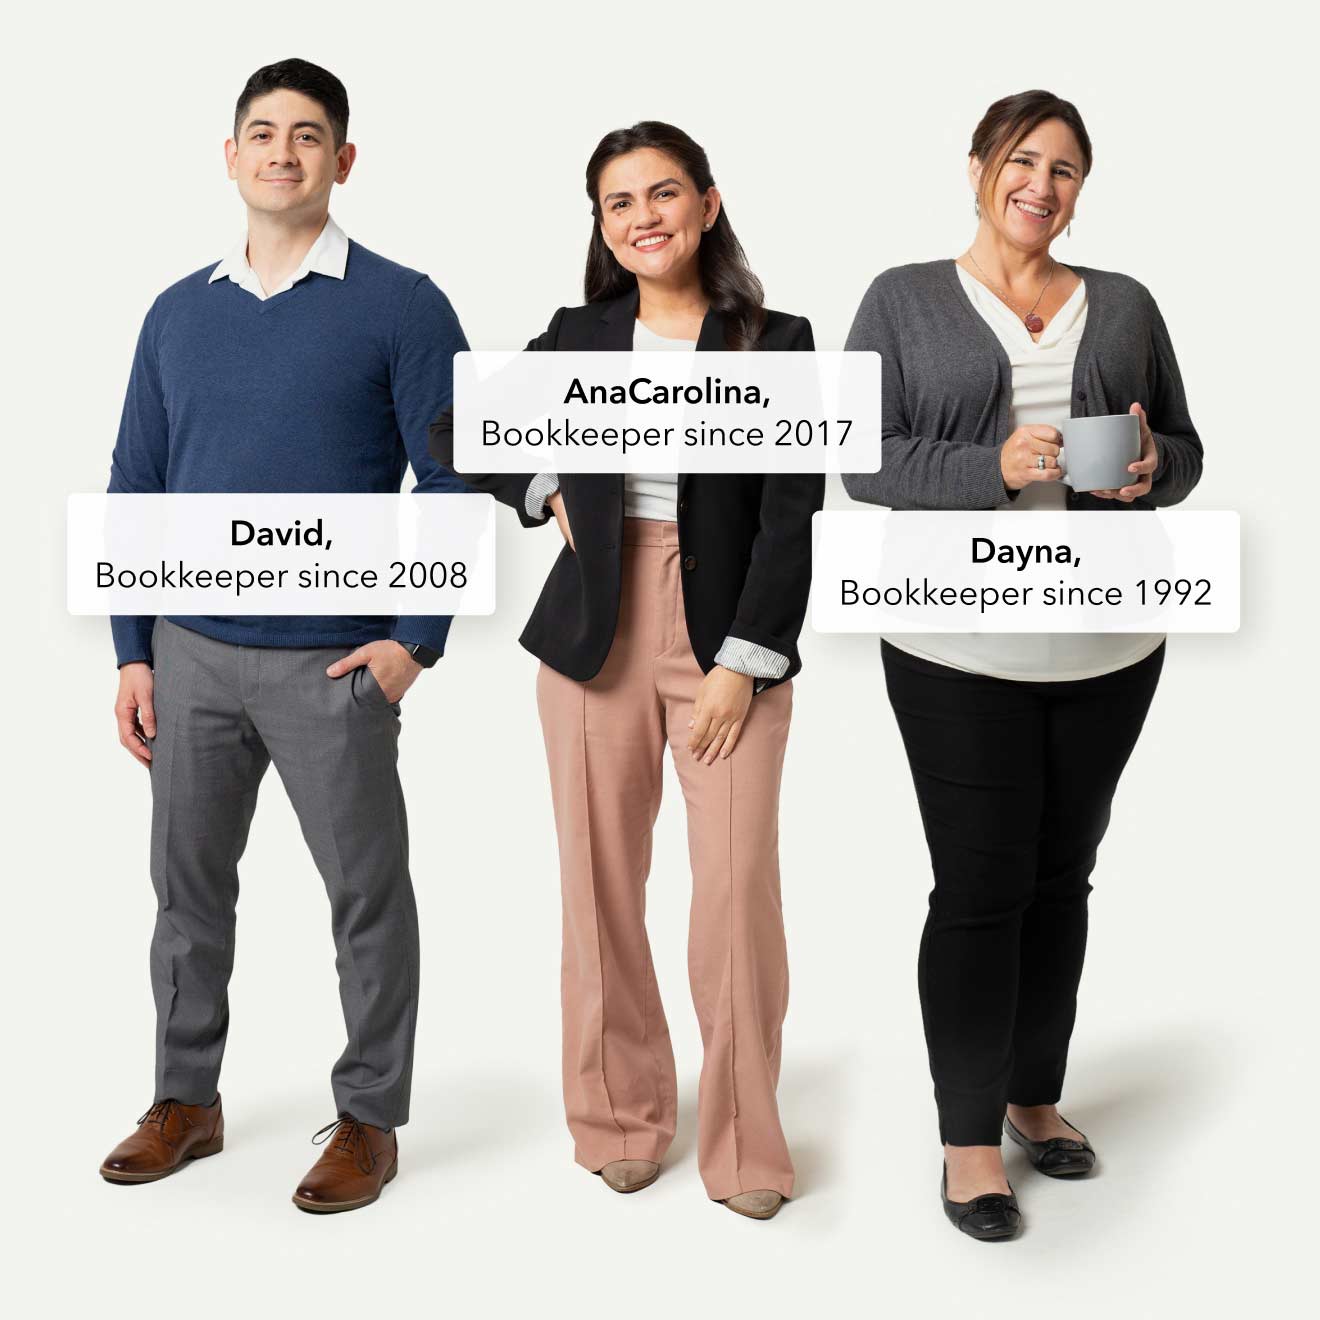 Three QuickBooks bookkeepers named David, AnaCarolina, and Dayna are standing in a row.